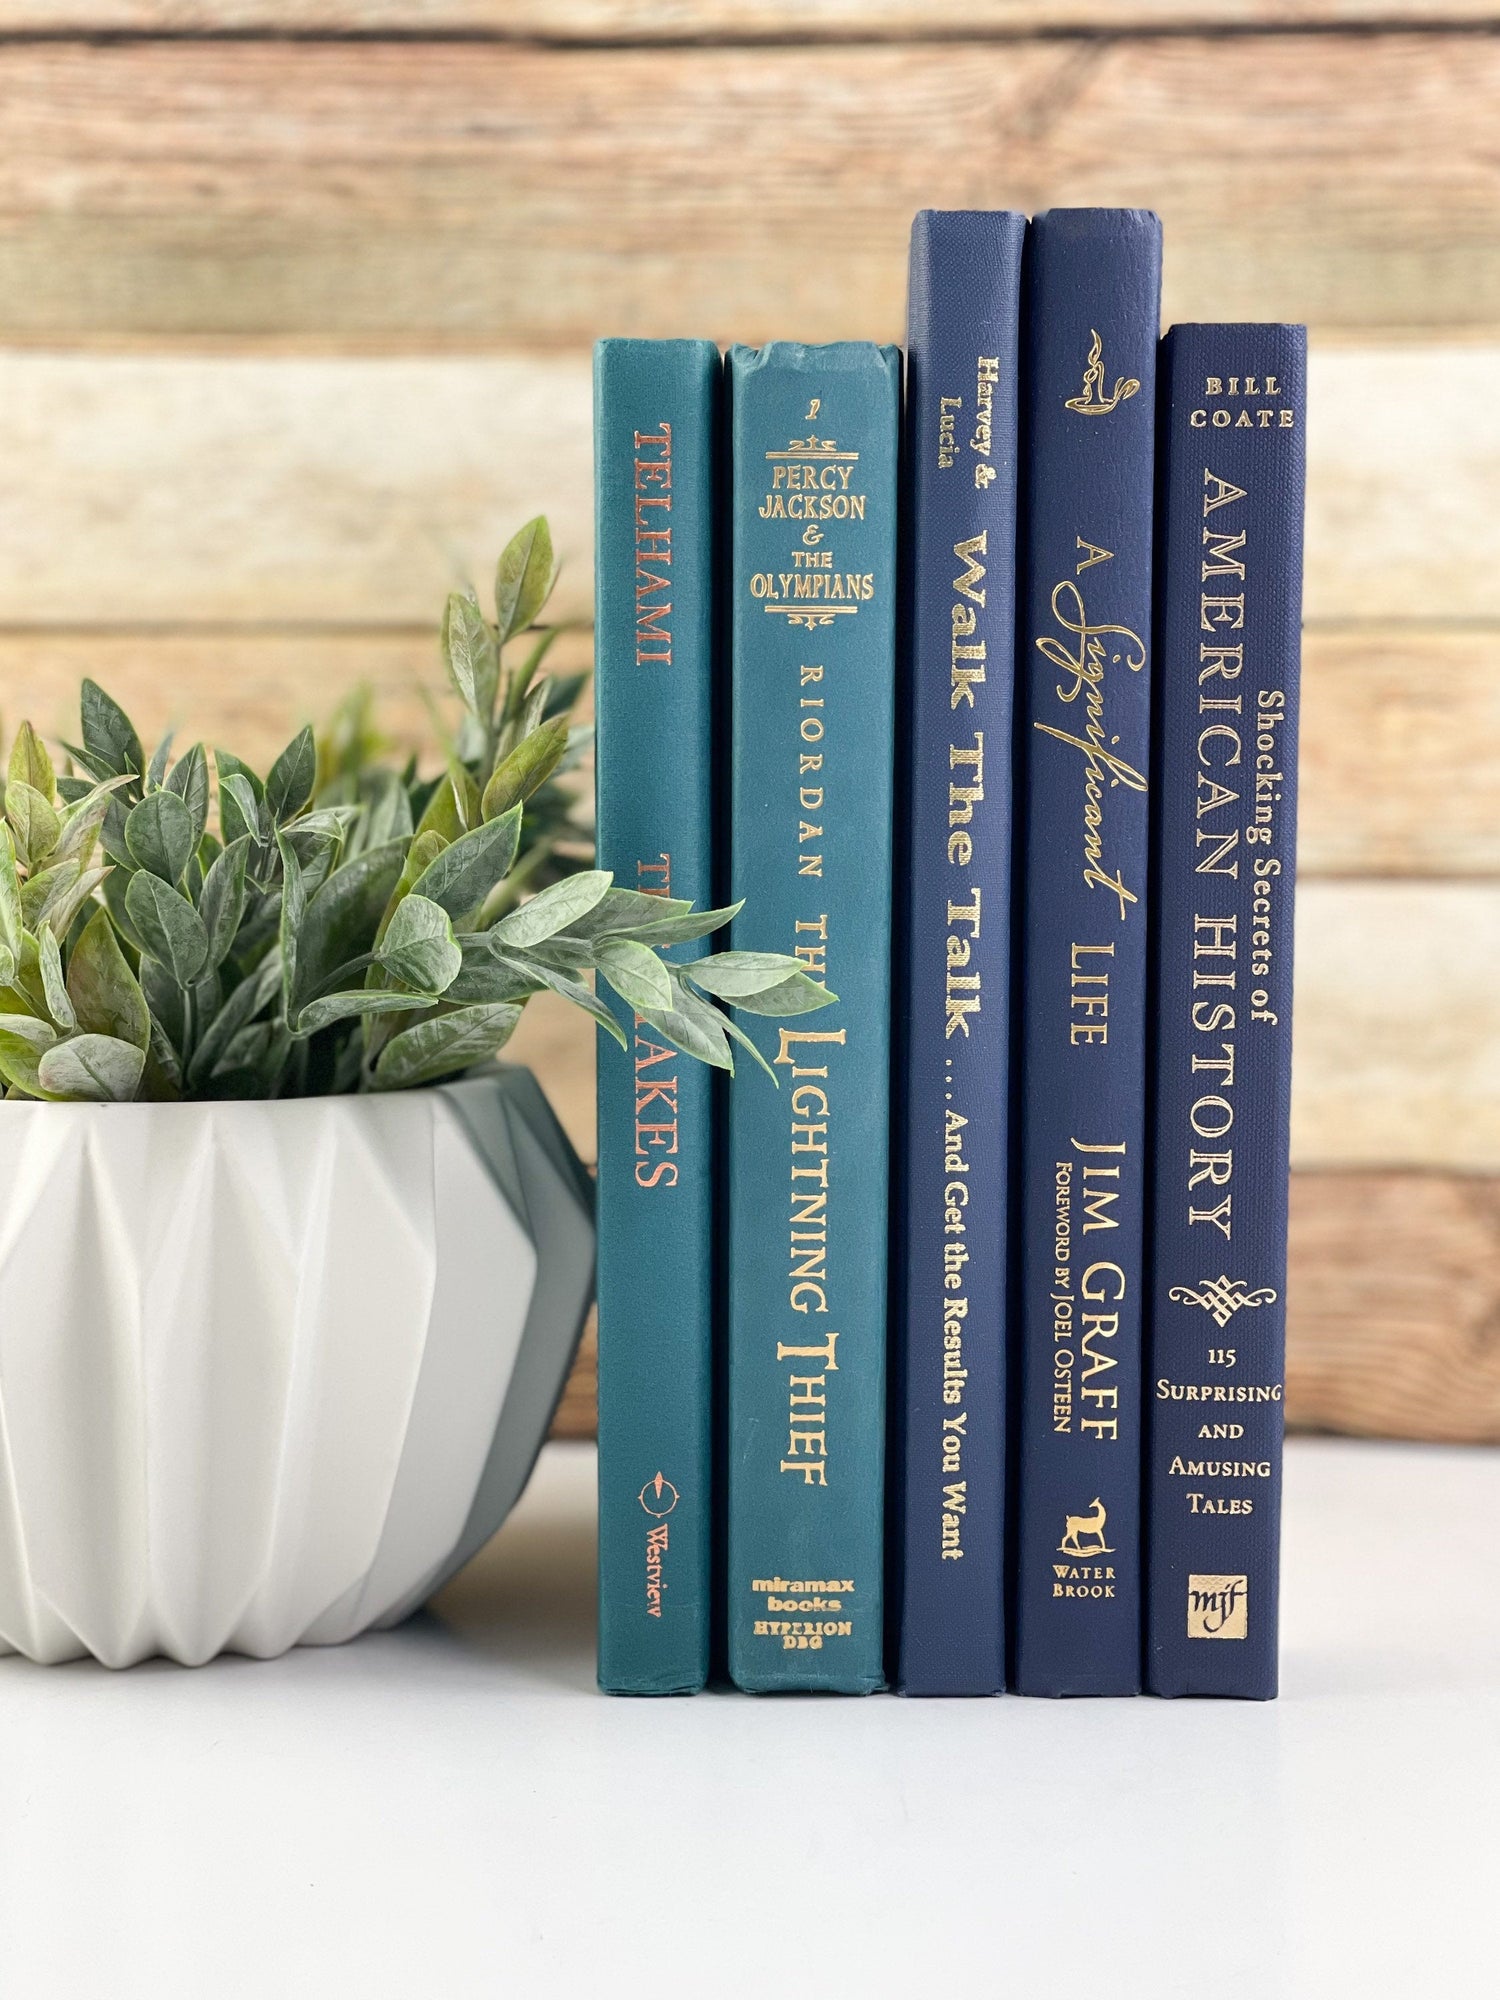 Blue and Green Books for Decor